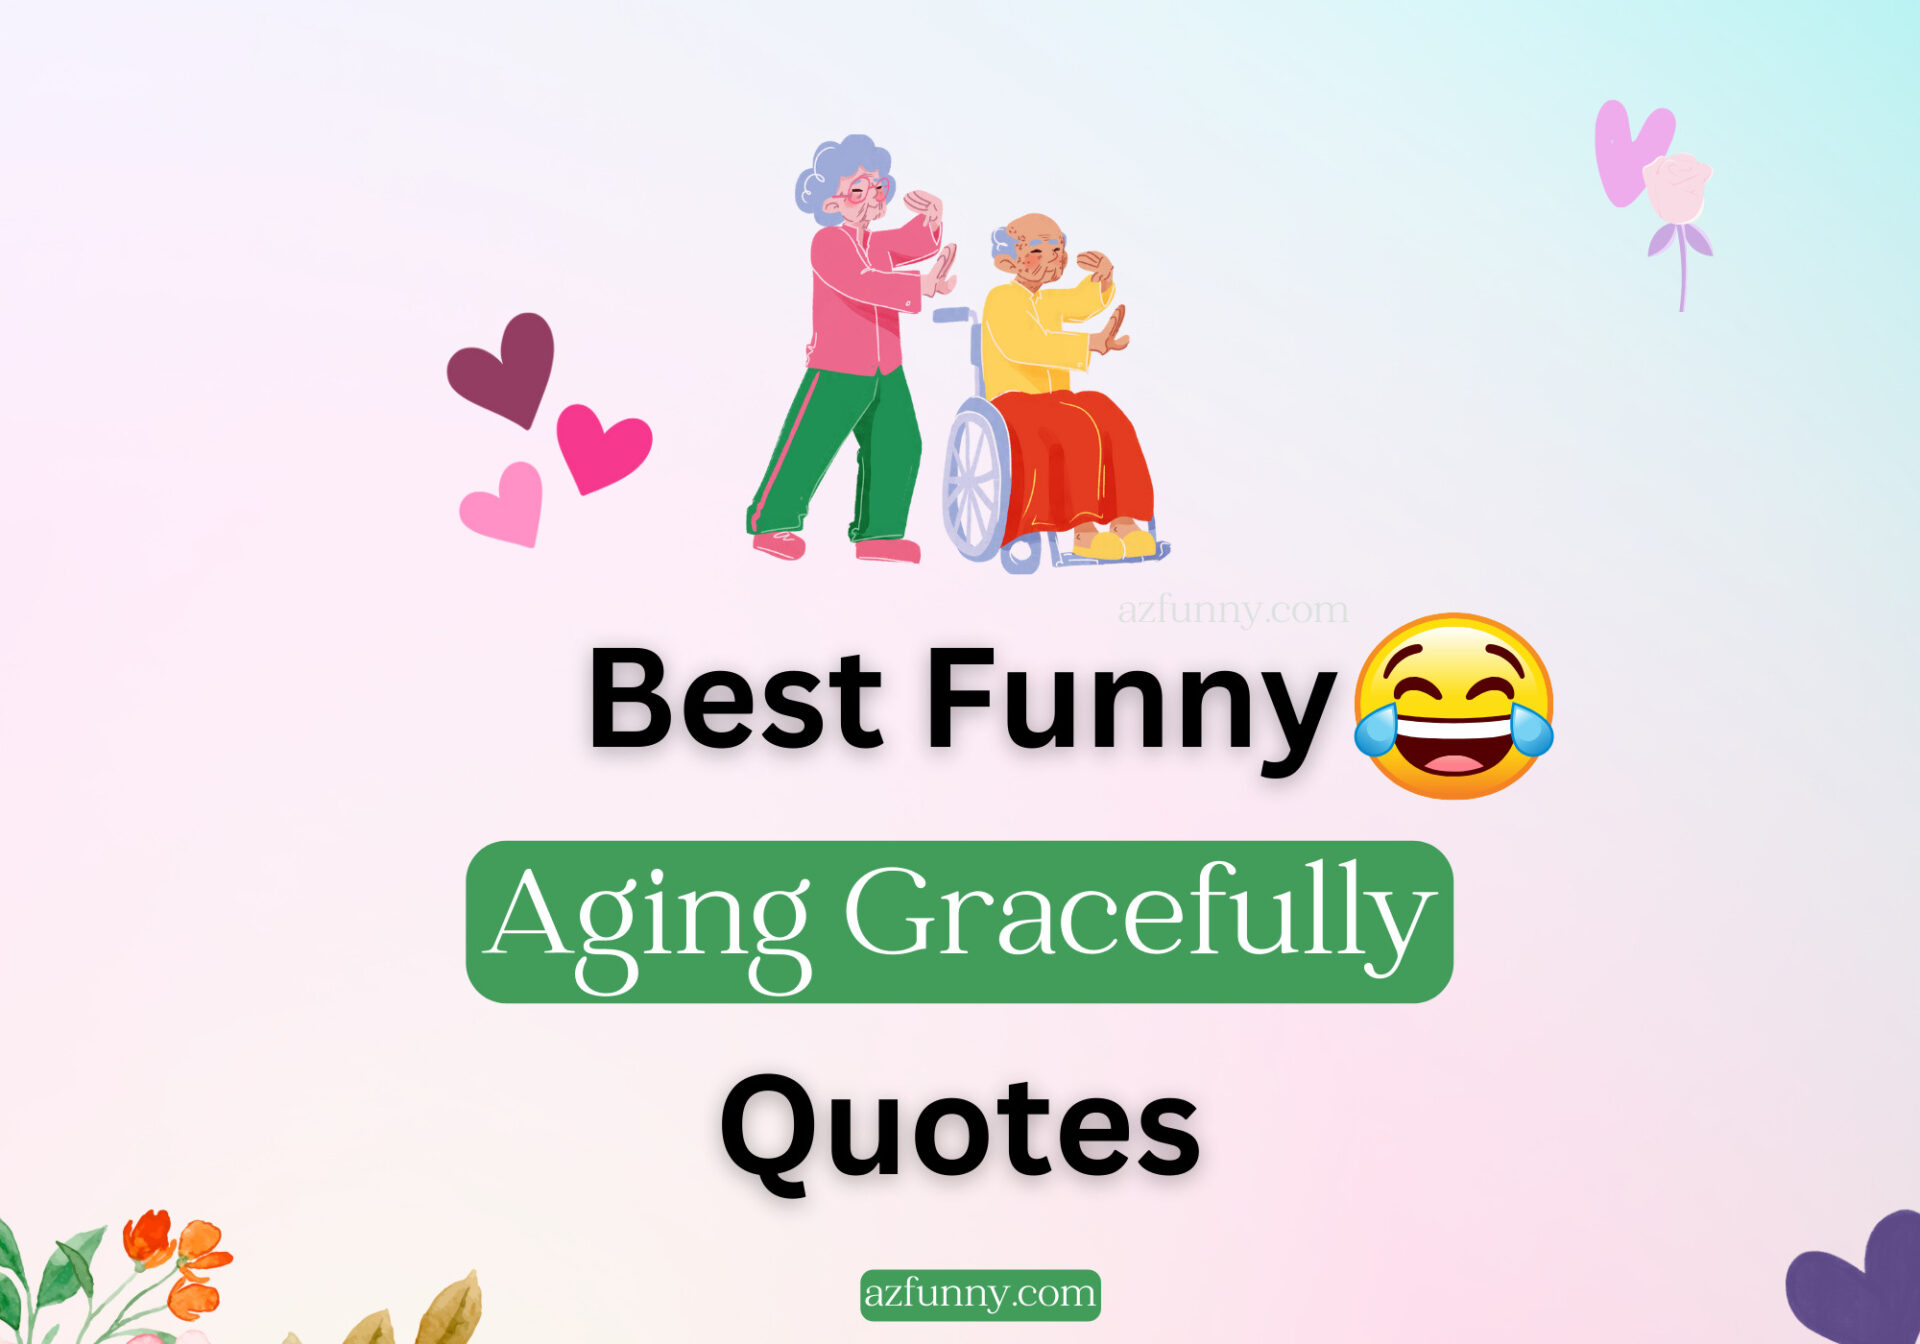 30+ Best Funny Quotes About Aging Gracefully in 2023 - Az Funny